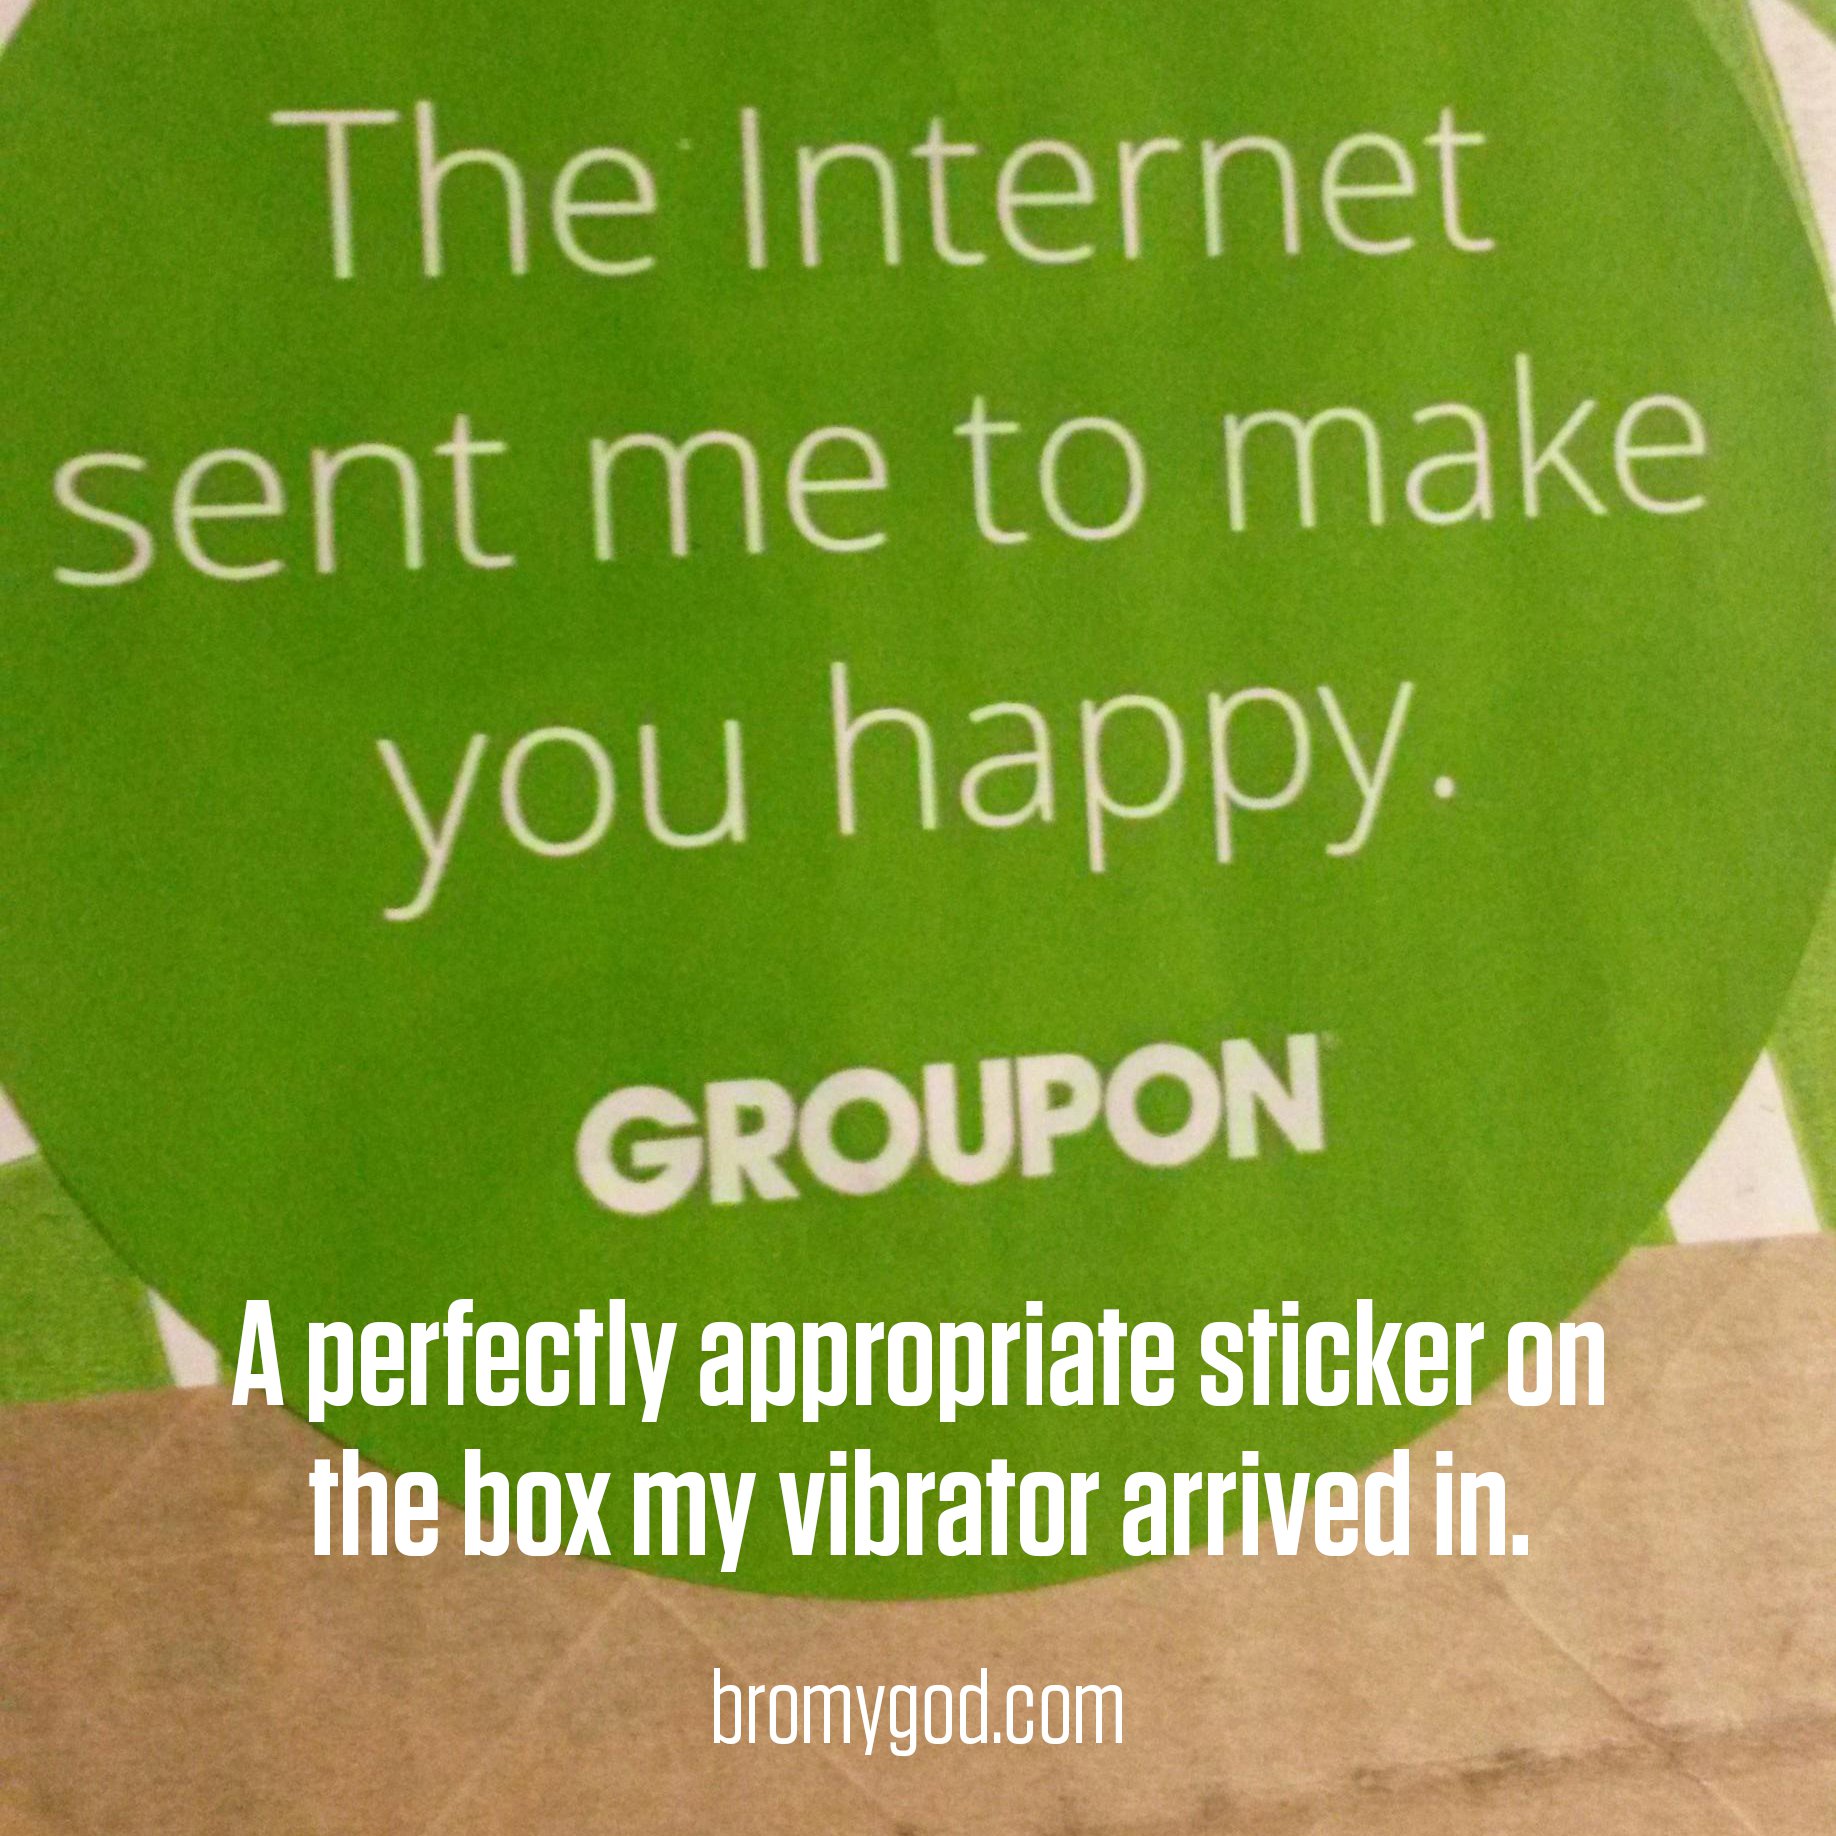 groupon - The Internet sent me to make you happy. Groupon A perfectly appropriate sticker on the box my vibrator arrived in. bromygod.com